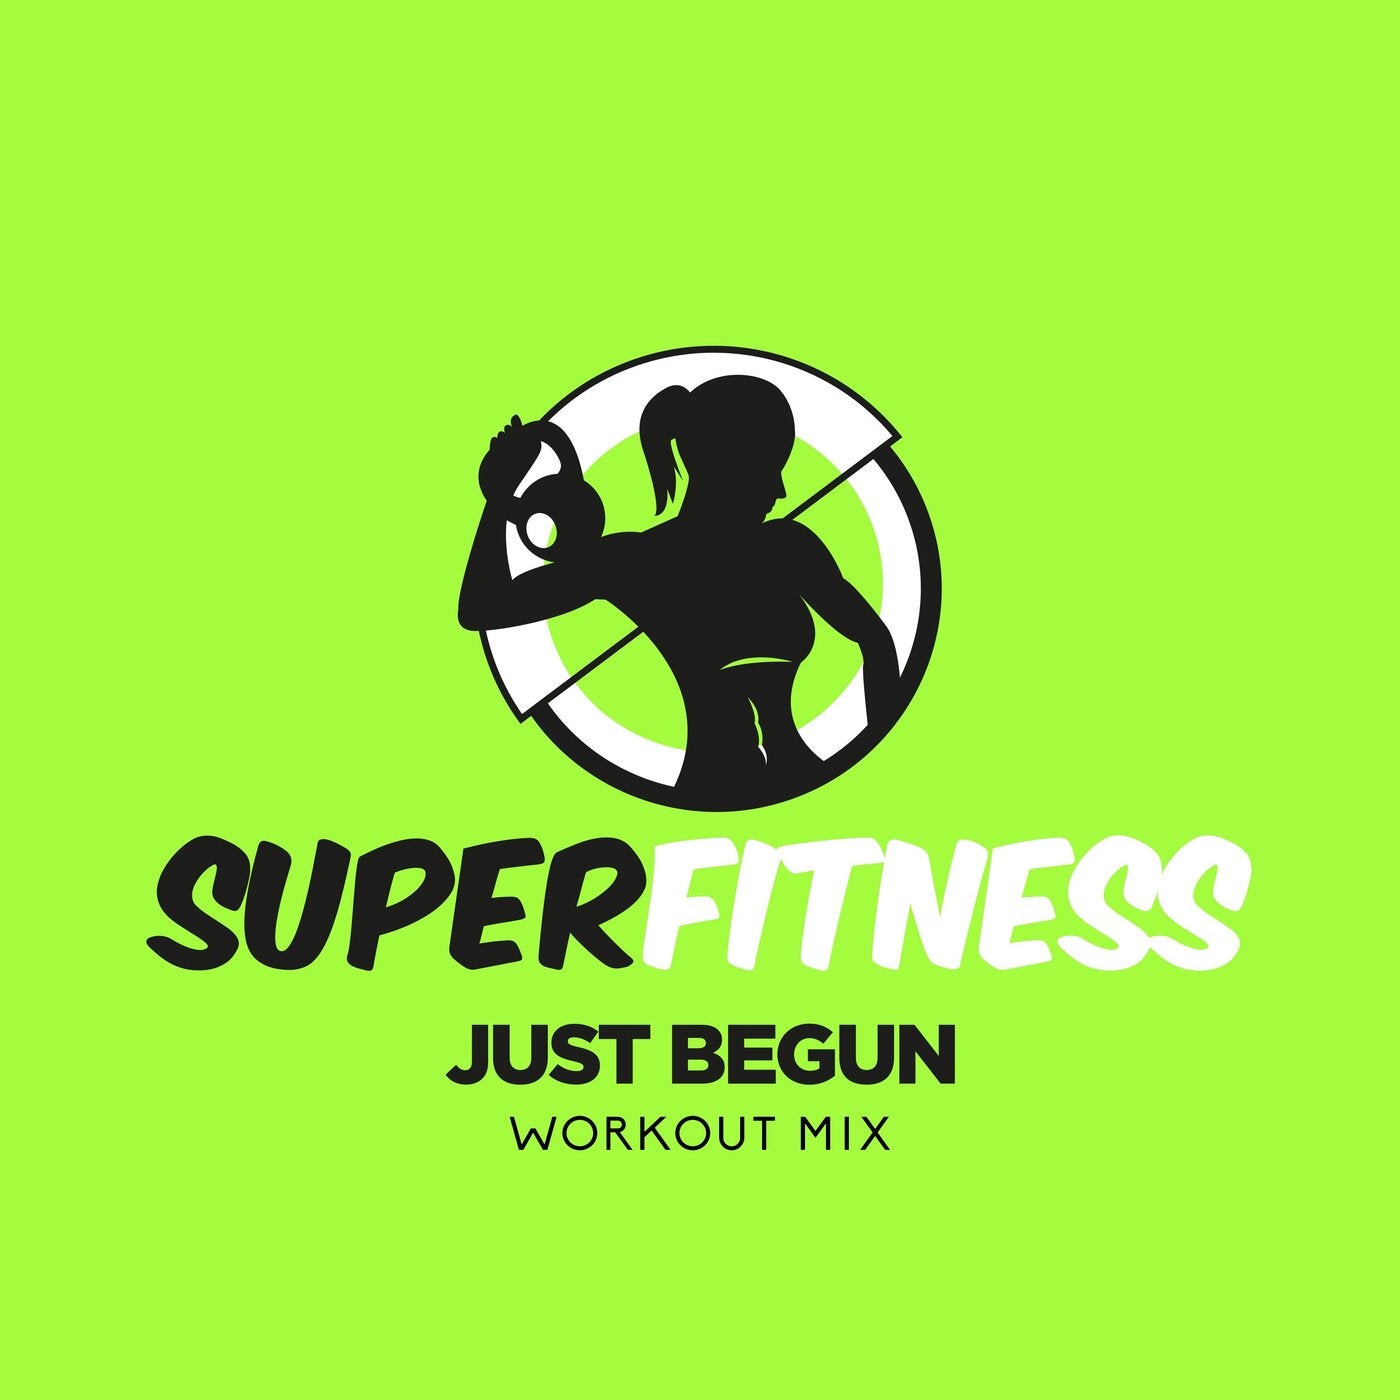 blanco como la nieve empleo Ideal Aerobic Hits Summer 2022: 60 Minutes Mixed for Fitness & Workout 135 bpm/32  Count from SuperFitness on Beatport